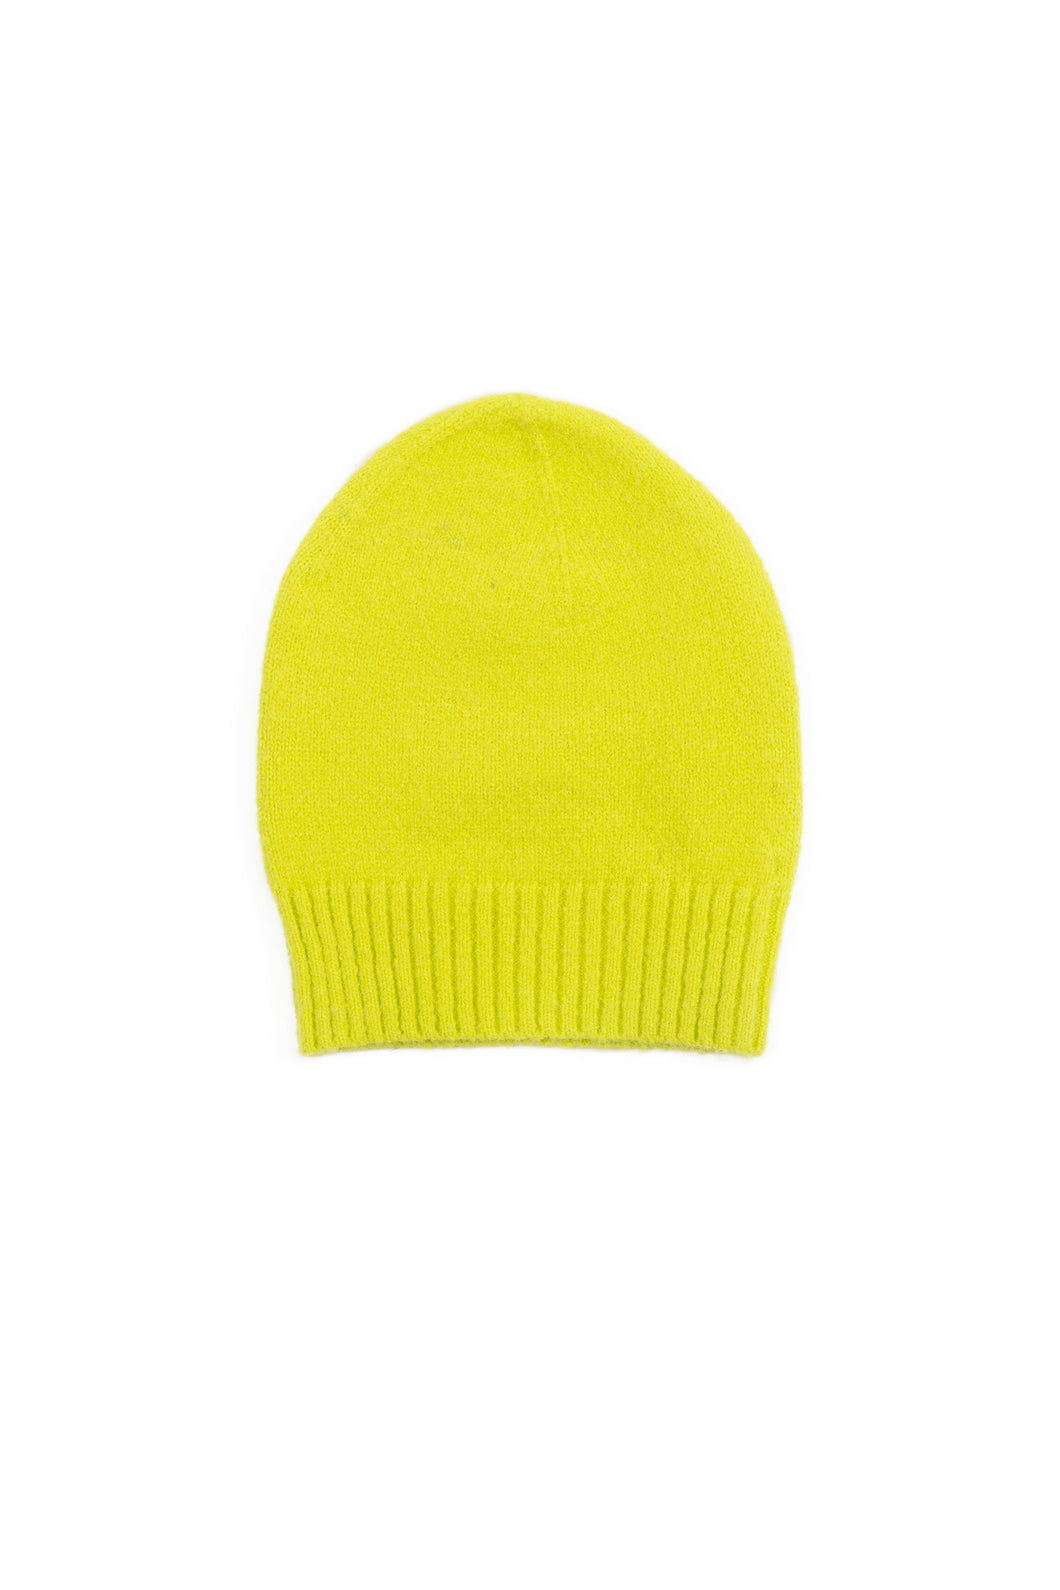 Lyla + Luxe Beanie Bright Lime